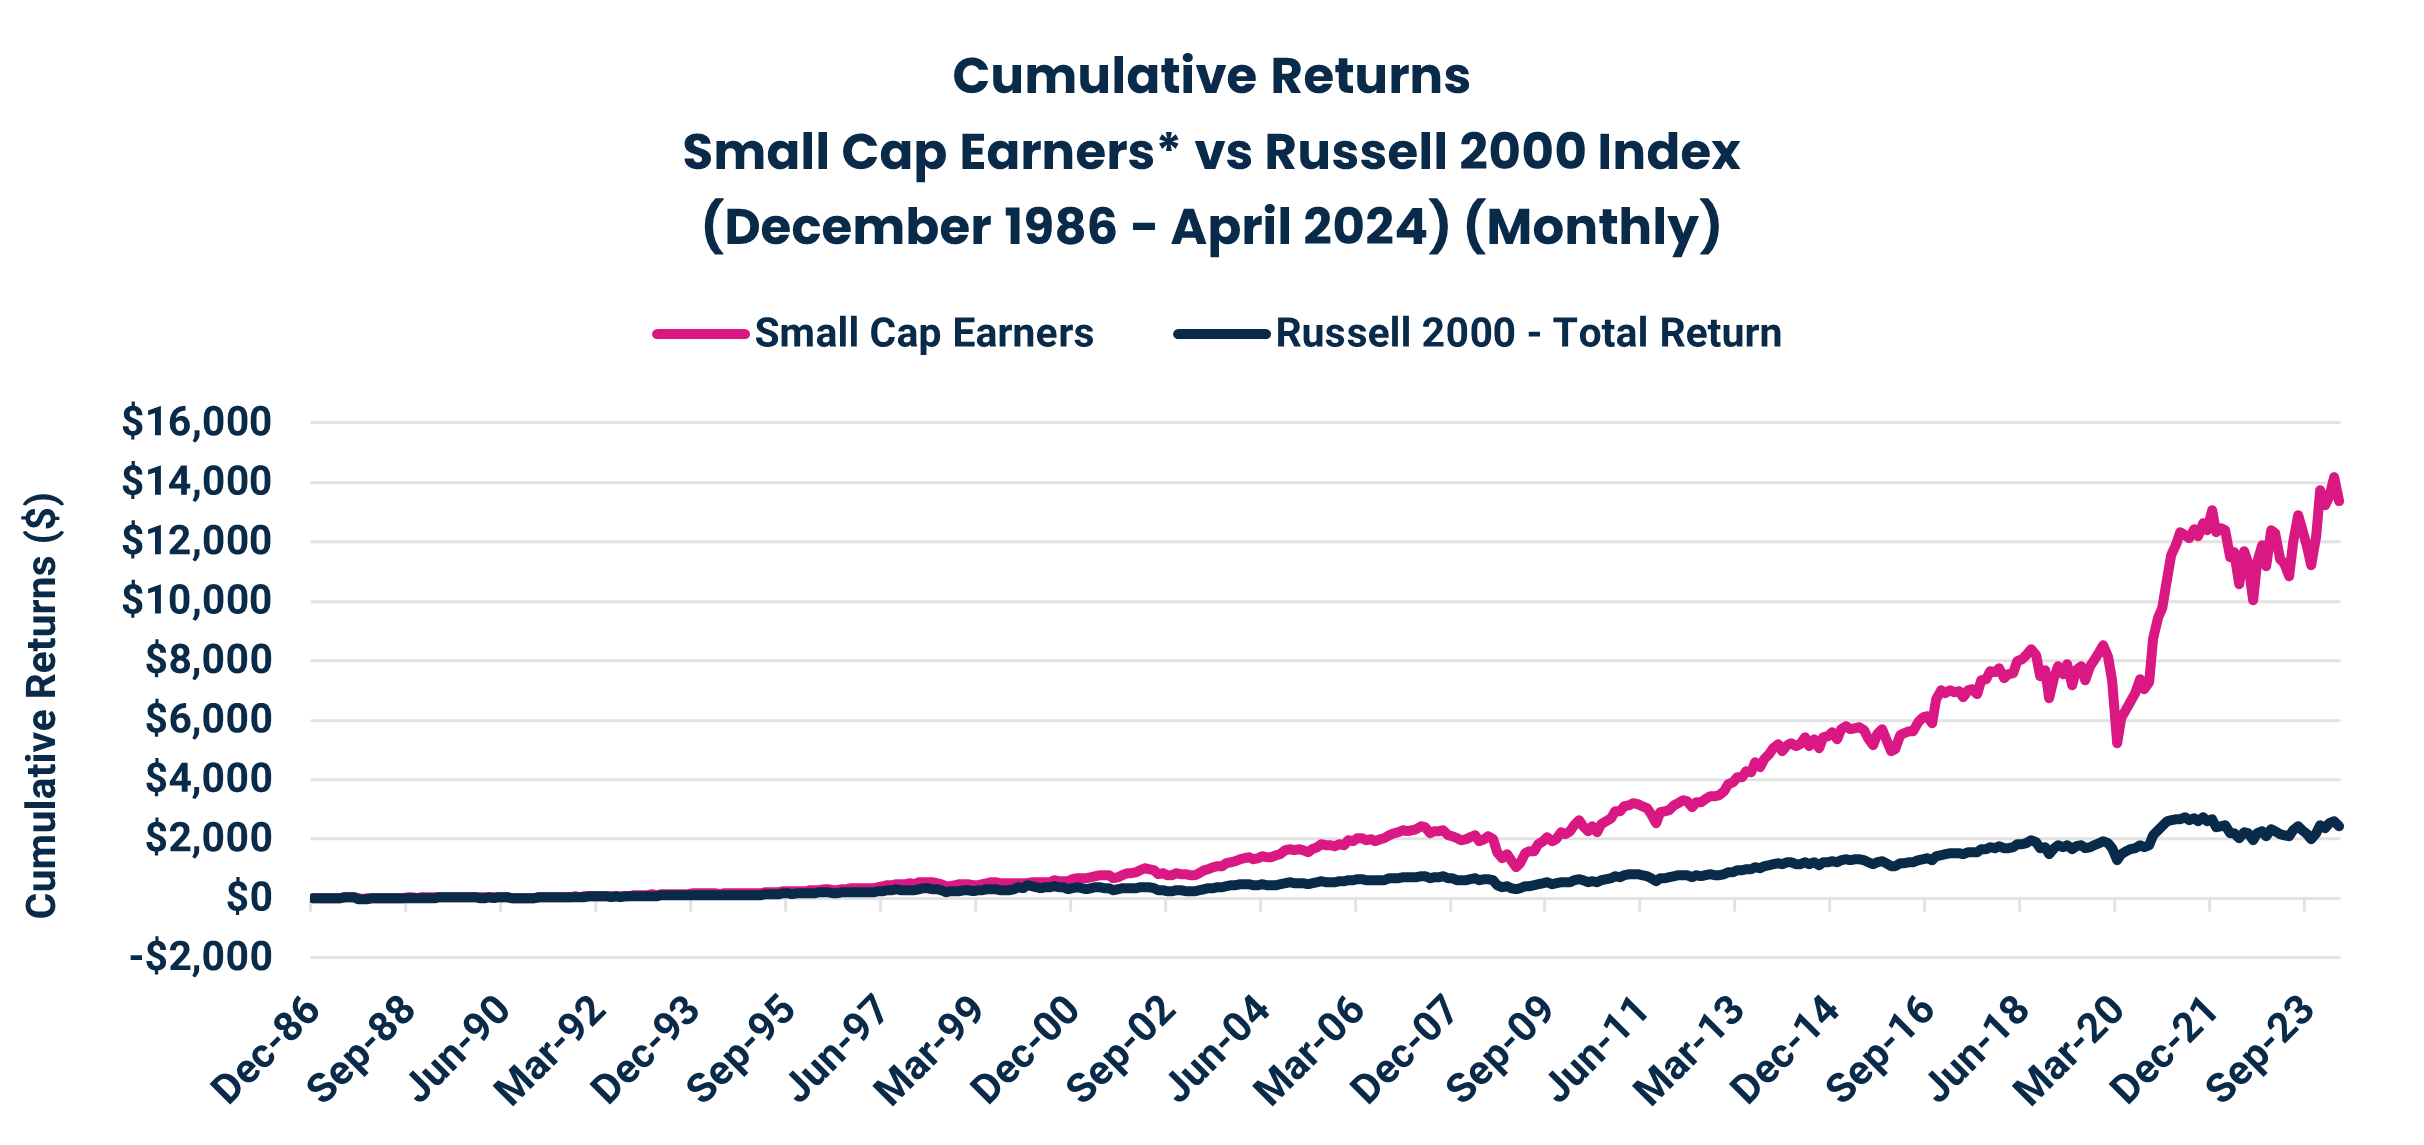 Cumulative Returns
Small Cap Earners* vs Russell 2000 Index
(December 1986 - April 2024) (Monthly)